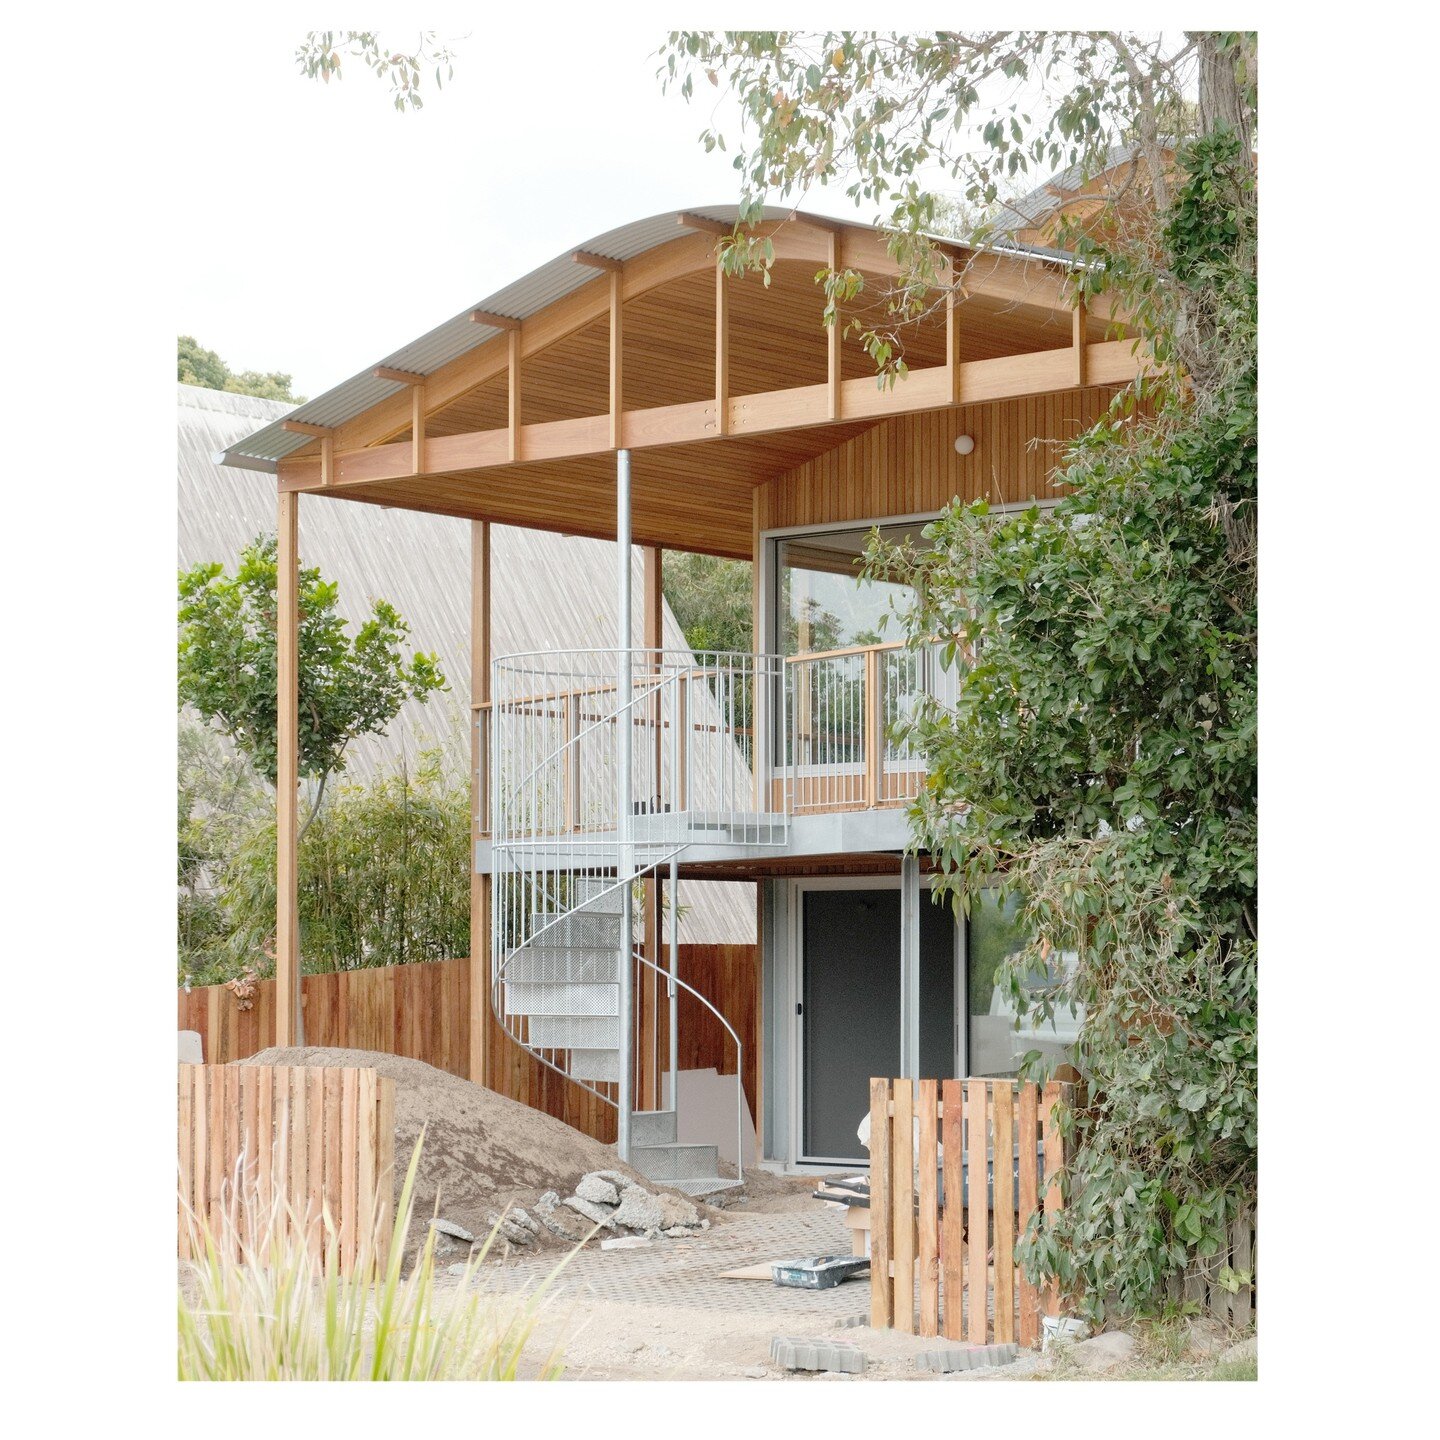 Our take on the external veranda stair shown in conversation with just some of the great entry stairs along the streets of Brunswick Heads. The spiral plunges into the garden below, and provides an arbour for greenery to climb around.

This shot also